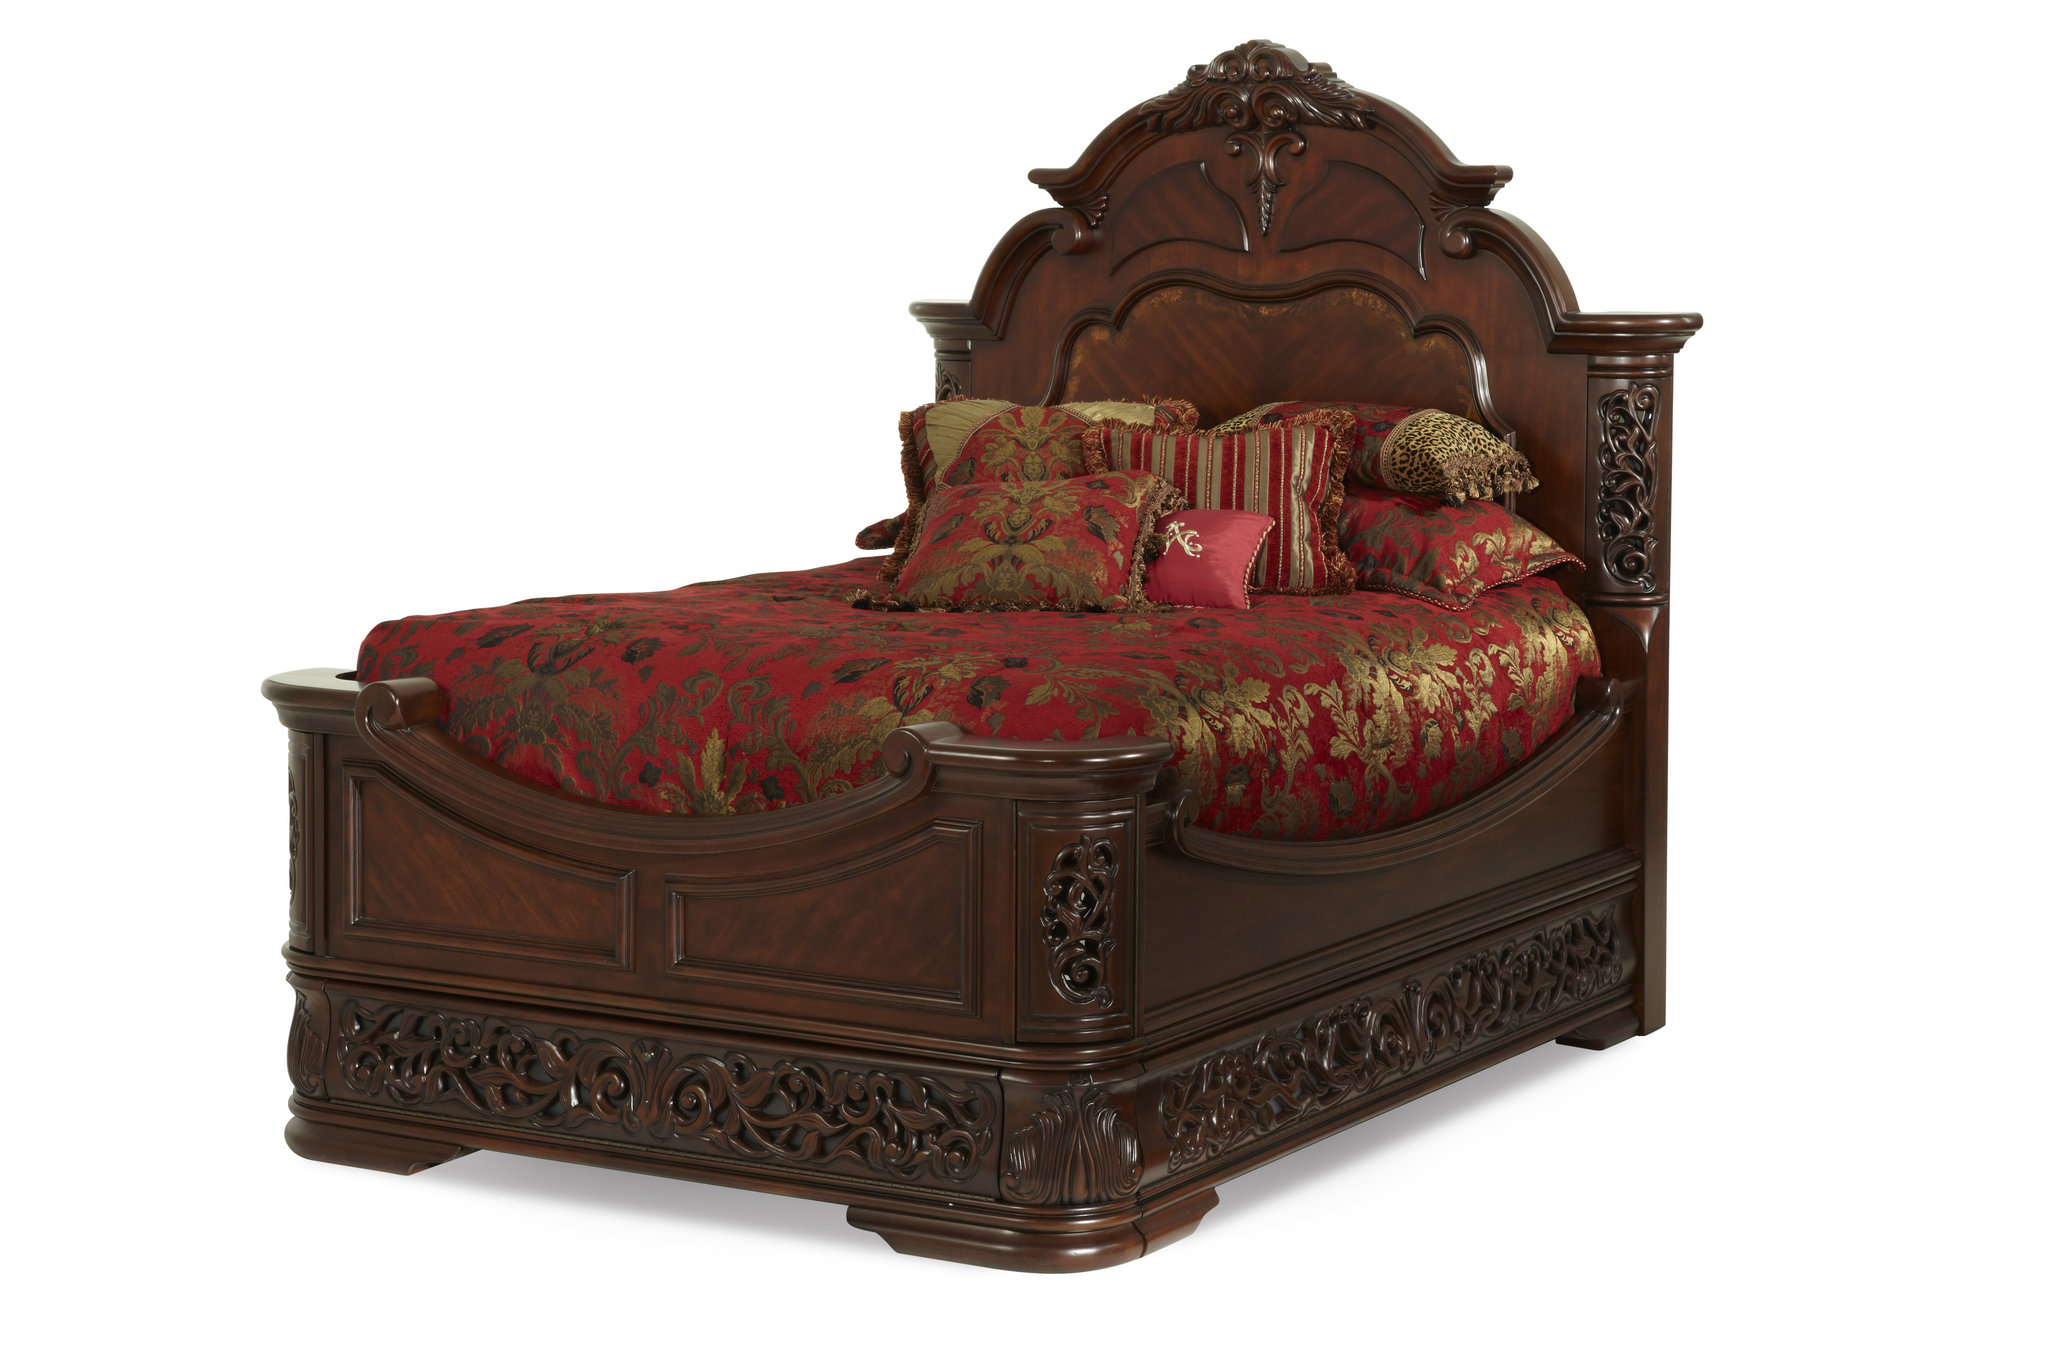 Excelsior Formal Bedroom Collection Aico with dimensions 2046 X 1364